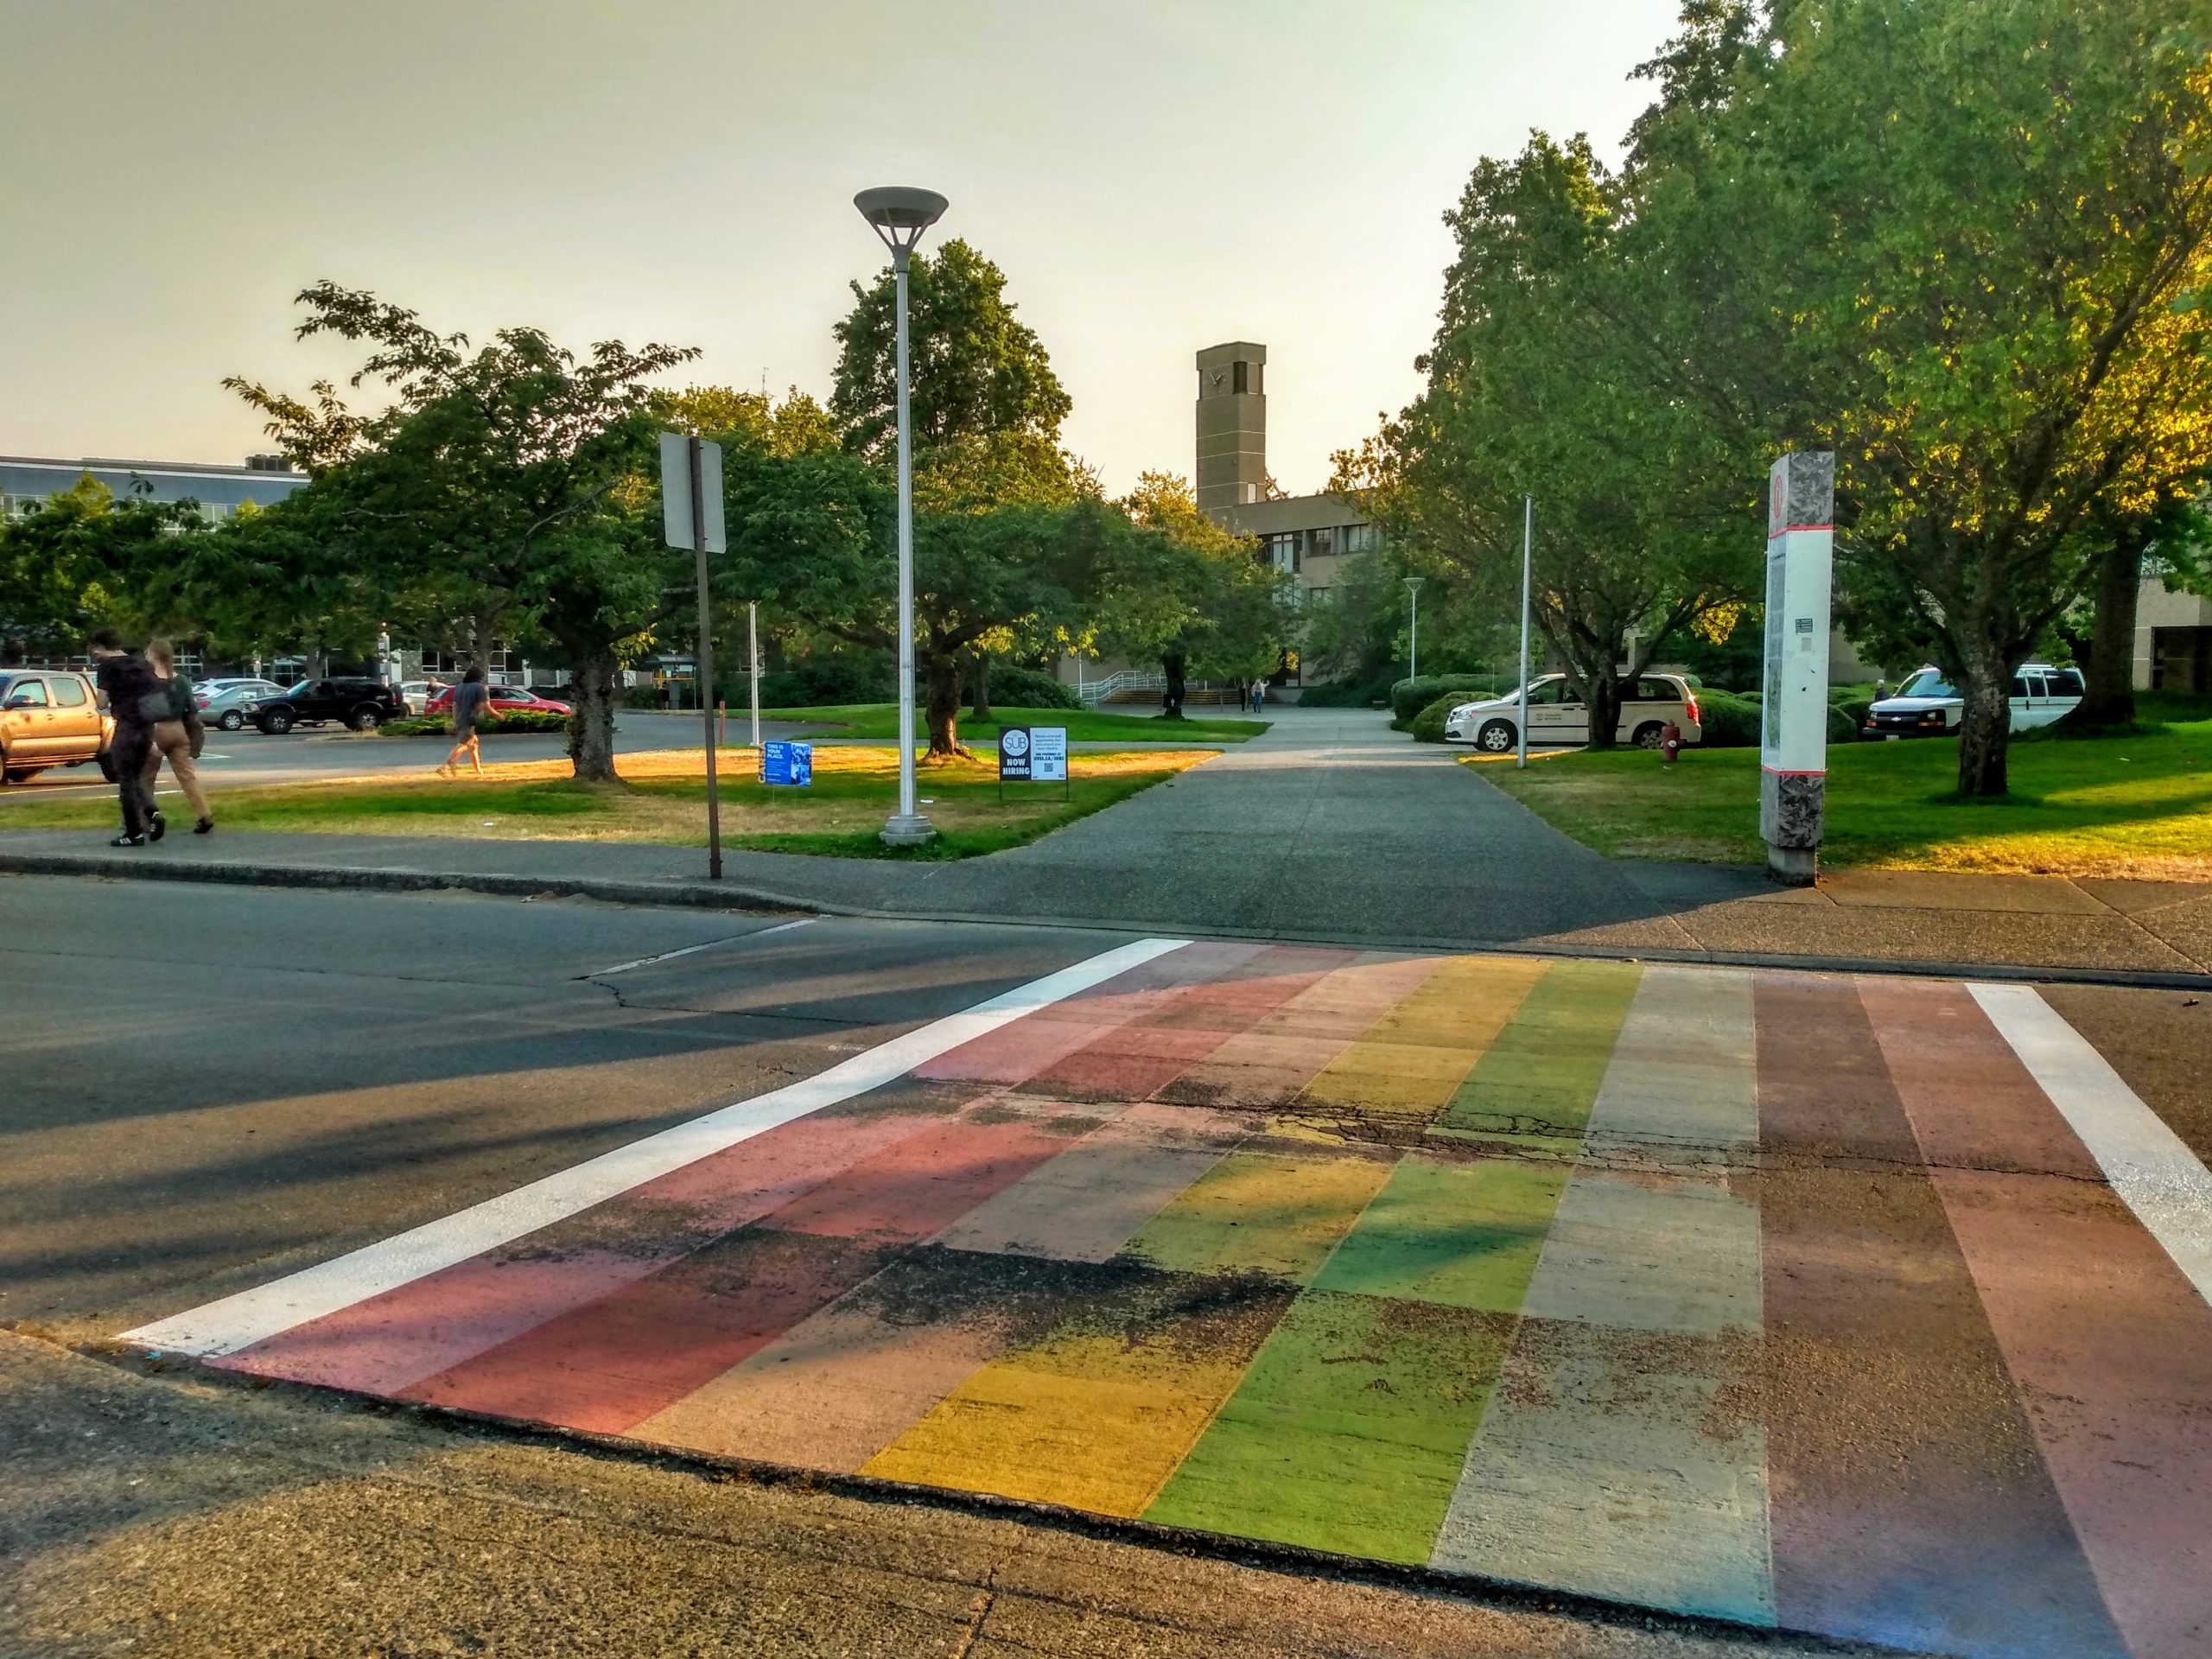 The Rainbow Crosswalk outside of Student Union Building at UVic. Photo by Sarah Roberts.